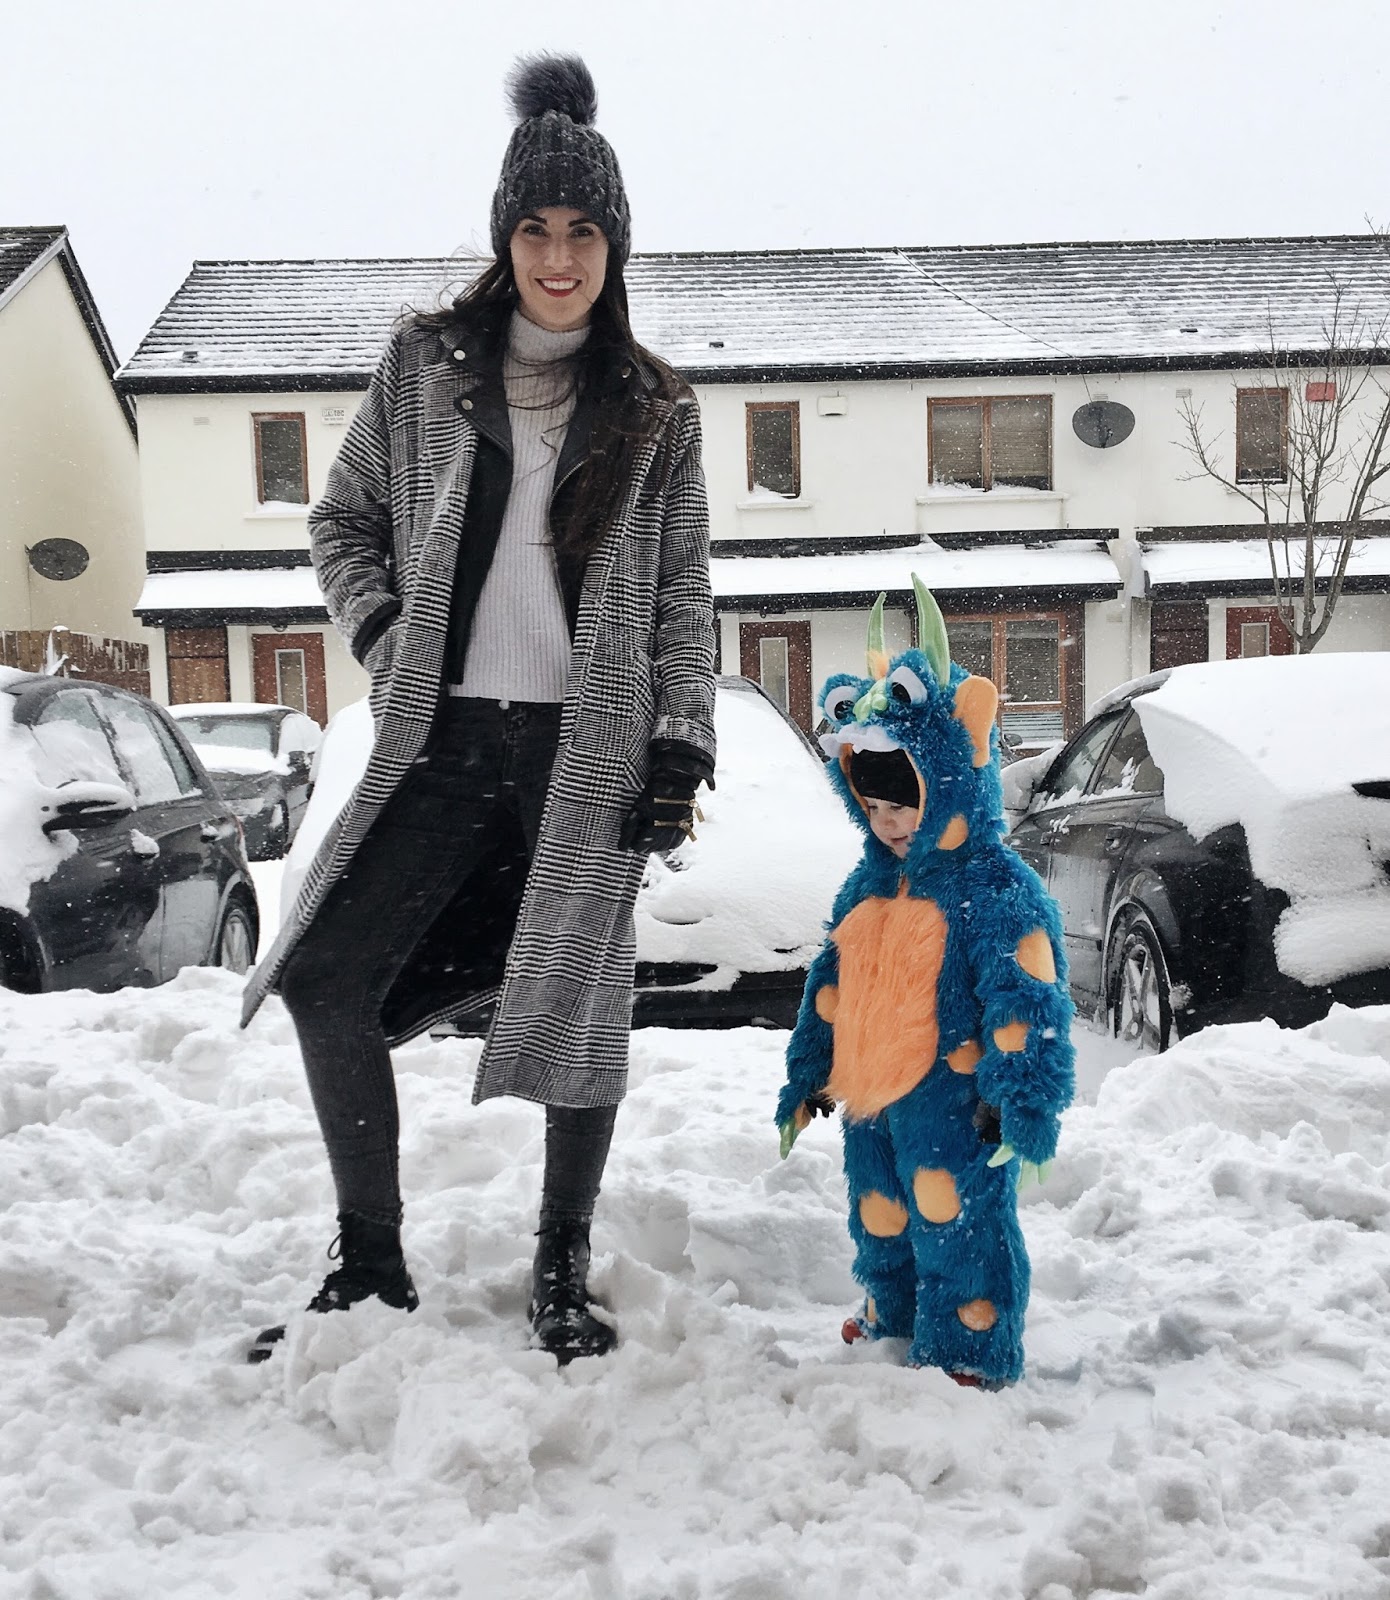 Fashionable outfit ideas for the snow - The CoolSpotter